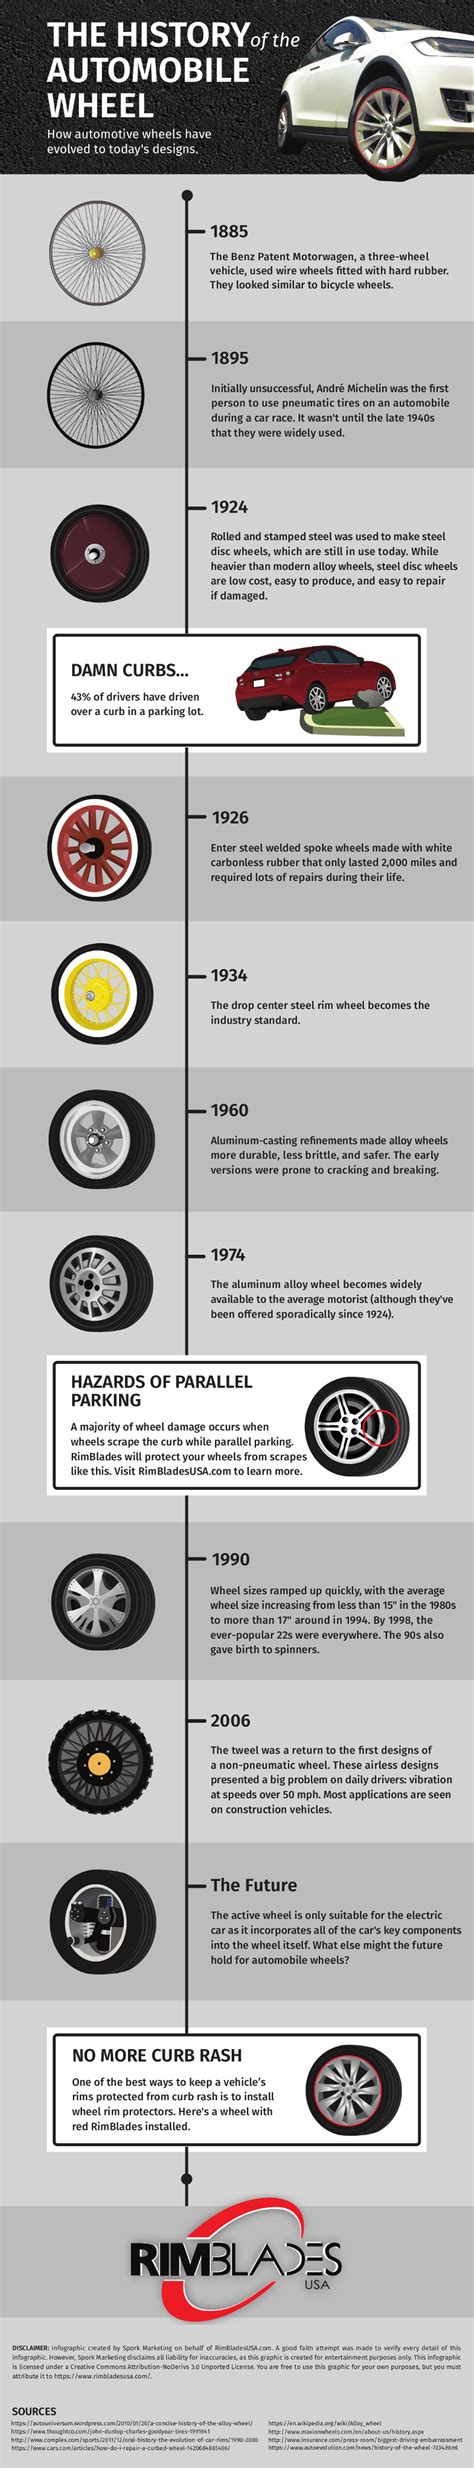 Autoinfome The History Of The Automobile Wheels